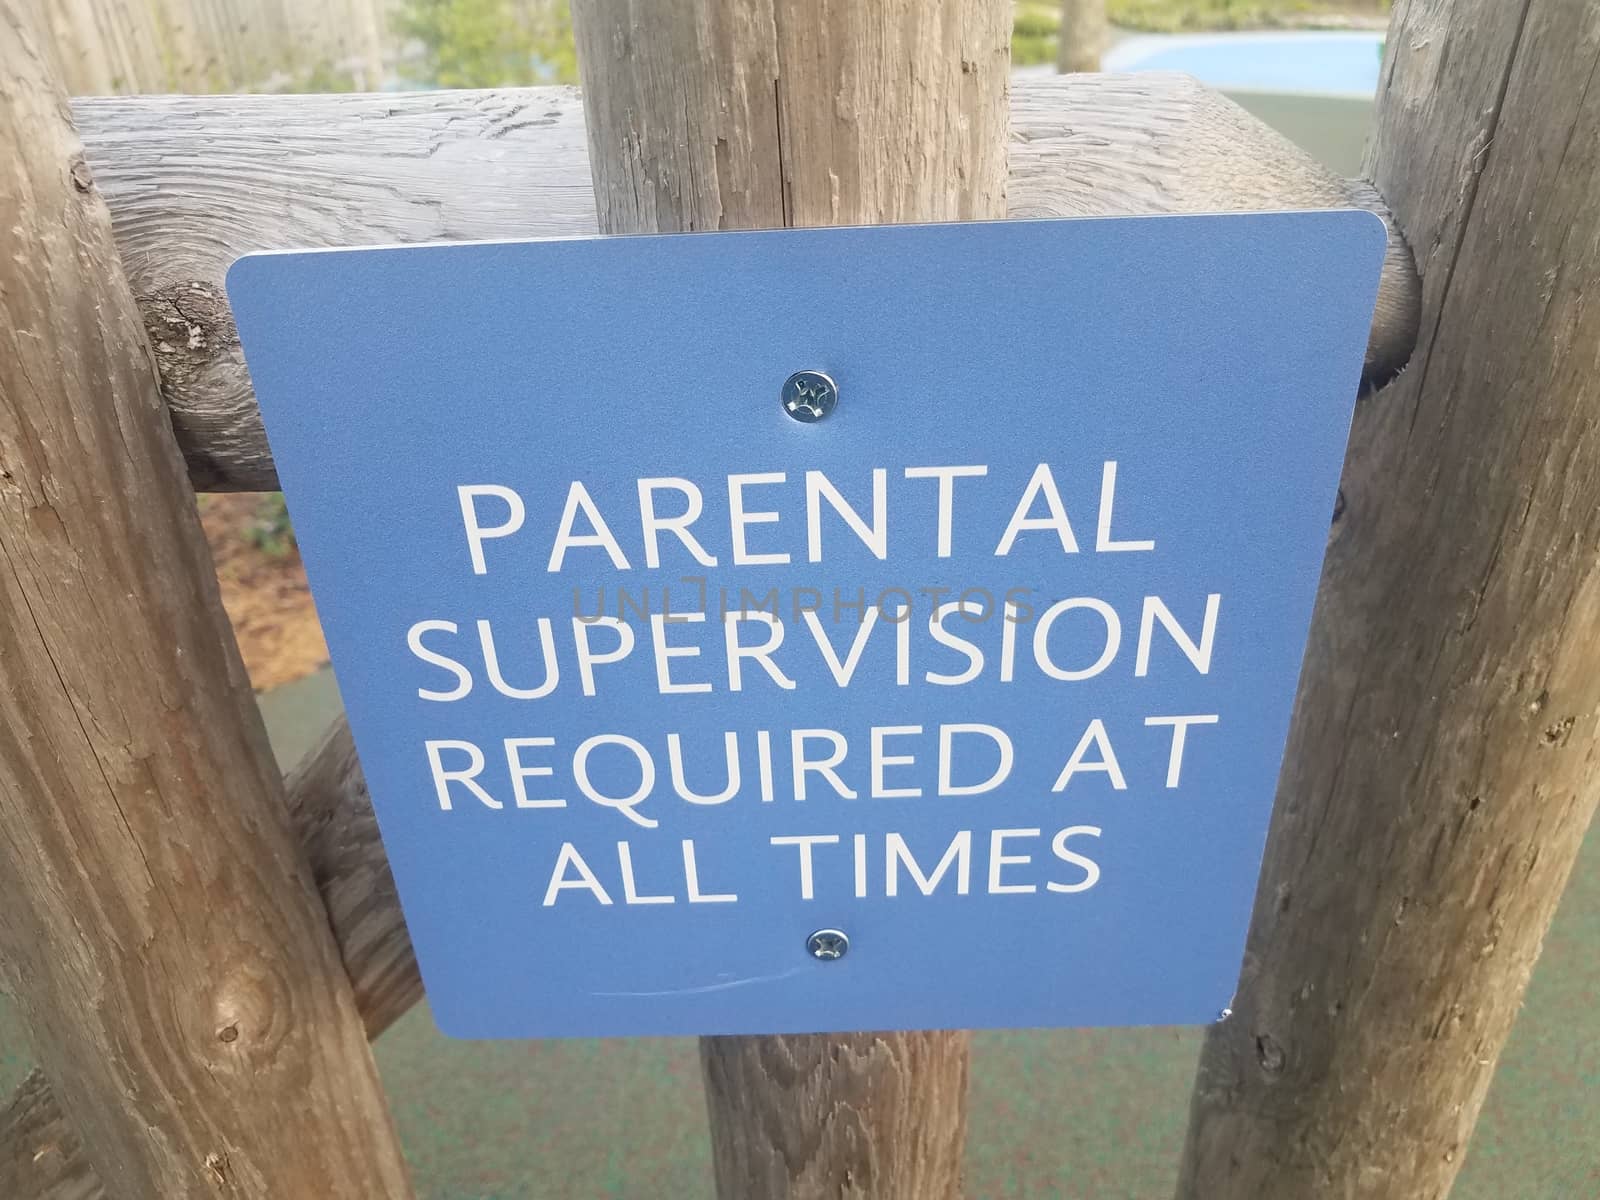 blue parental supervision required at all times sign on wood fence